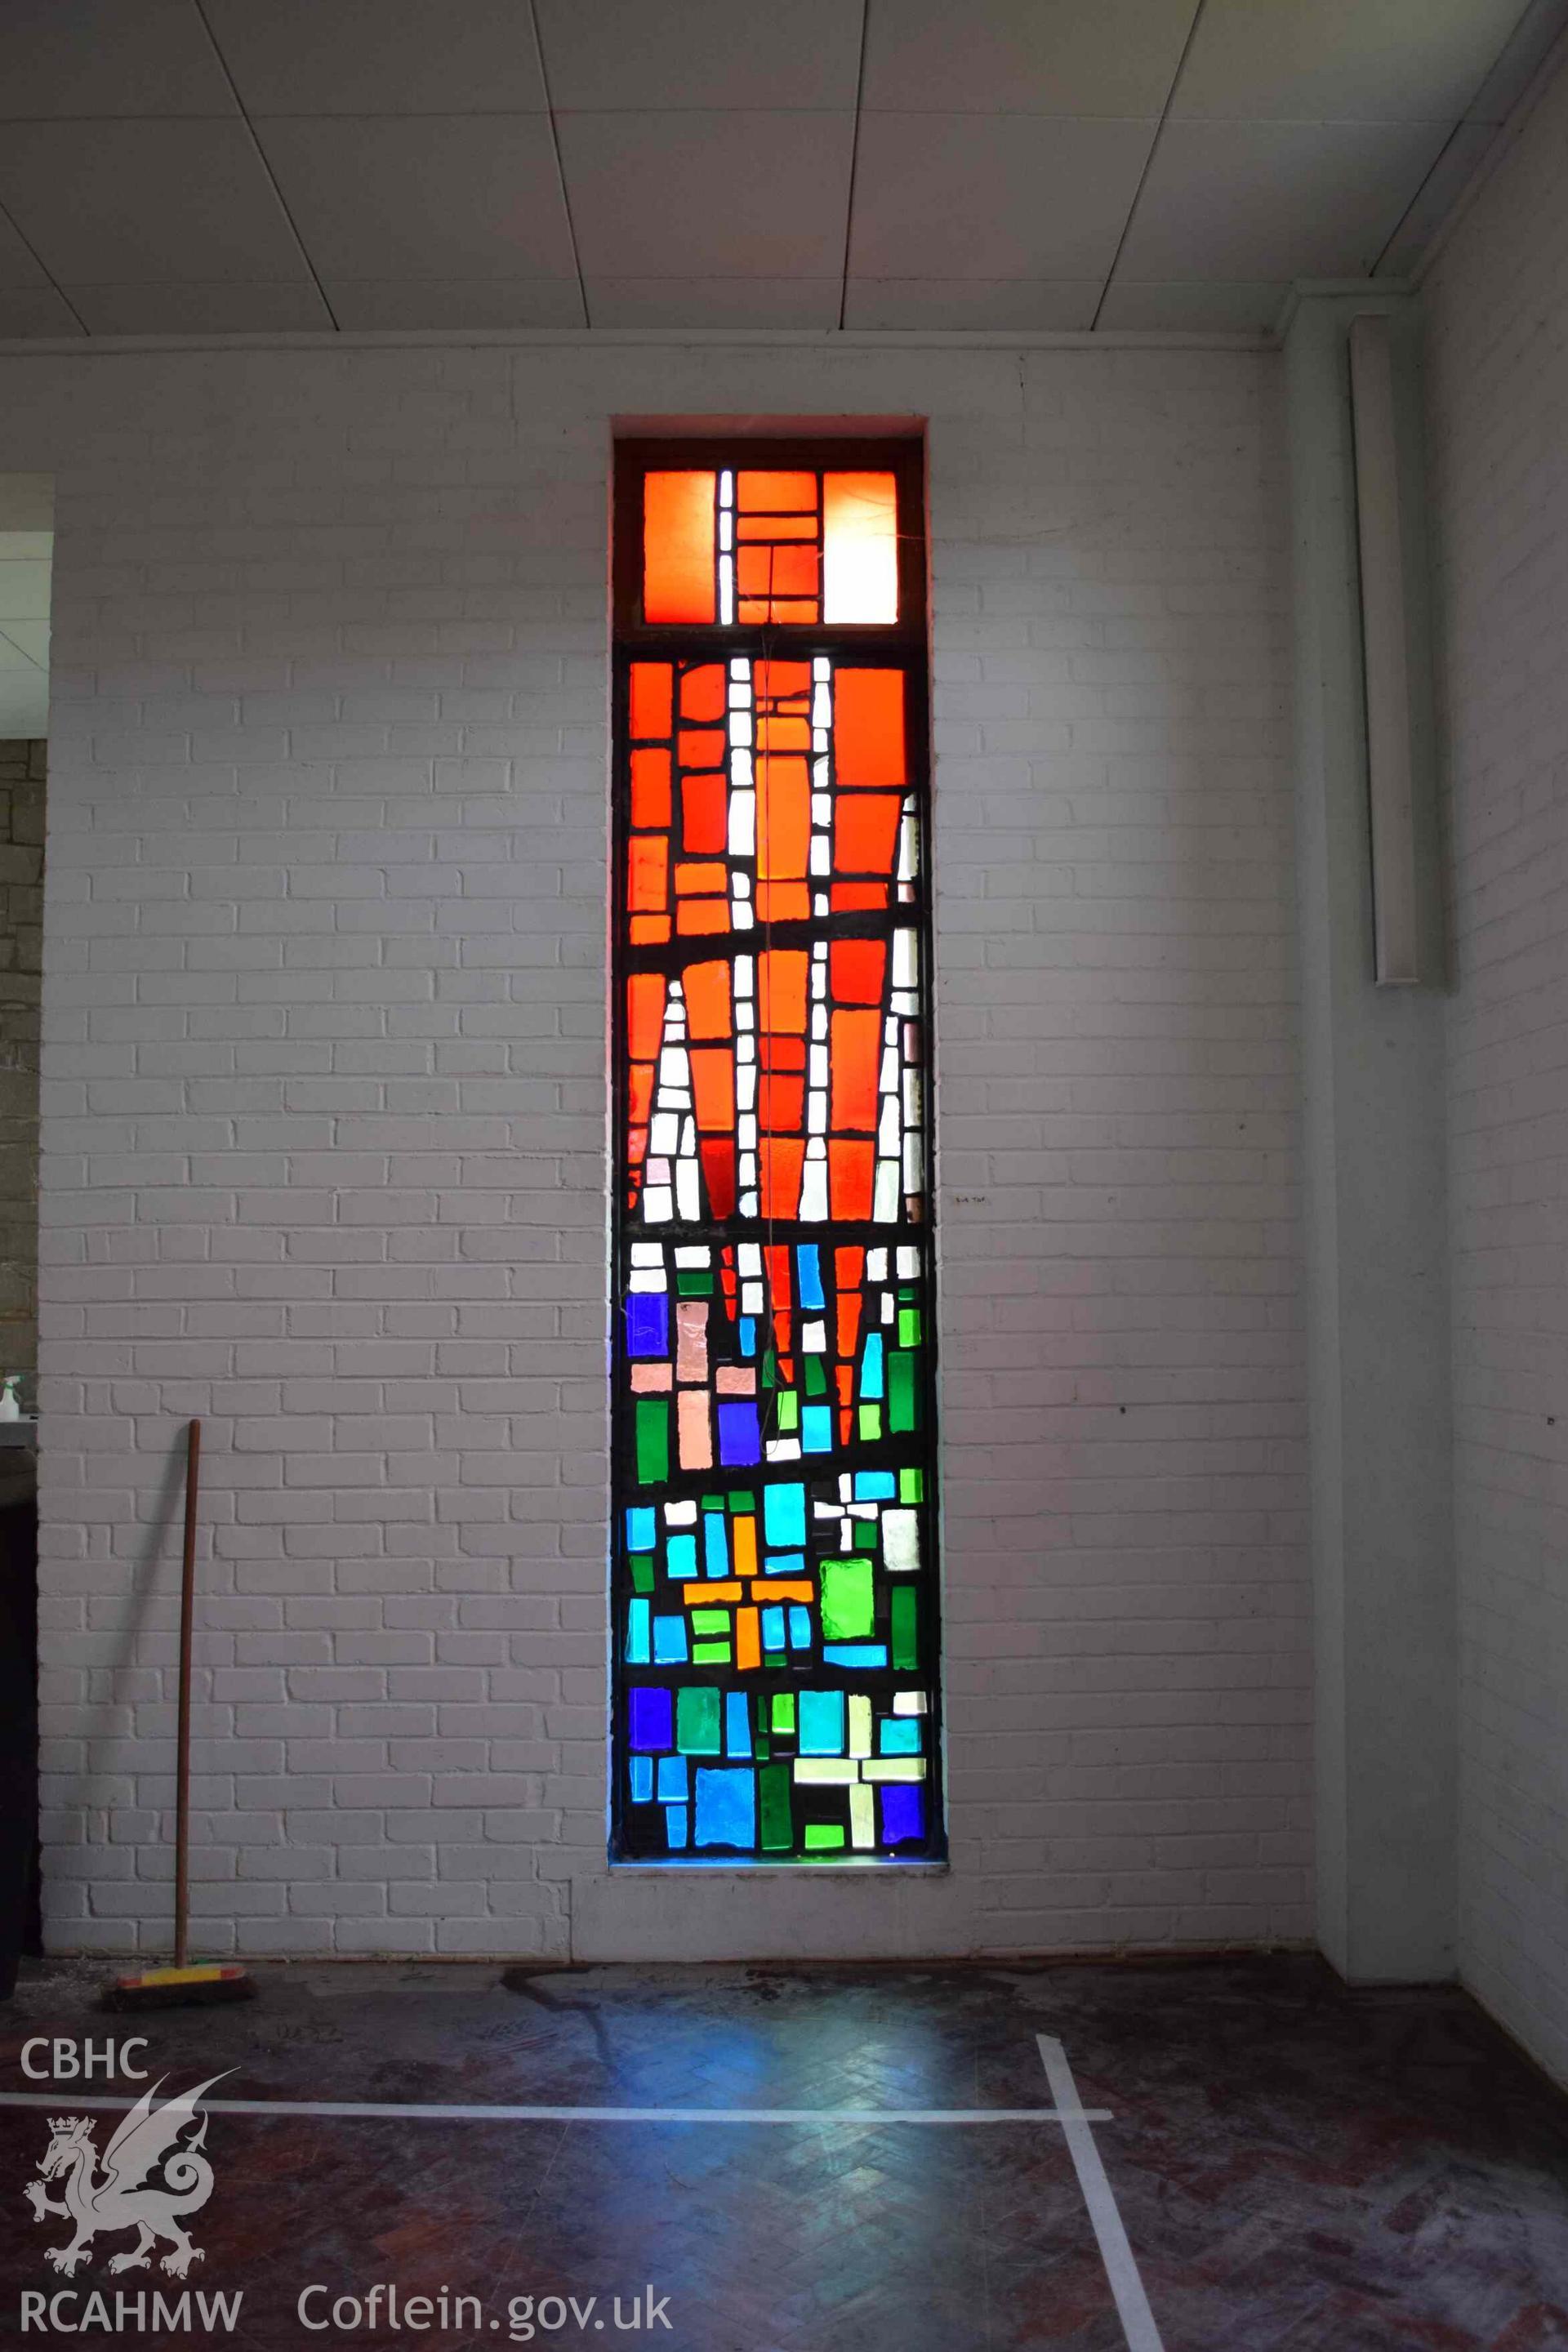 Photograph showing a Jonah Jones Dalle de Verre window (9c), at the church of The Resurrection of Our Saviour, Morfa Nefyn, taken on behalf of the Architectural Glass Centre during the removal of the windows in March 2019.